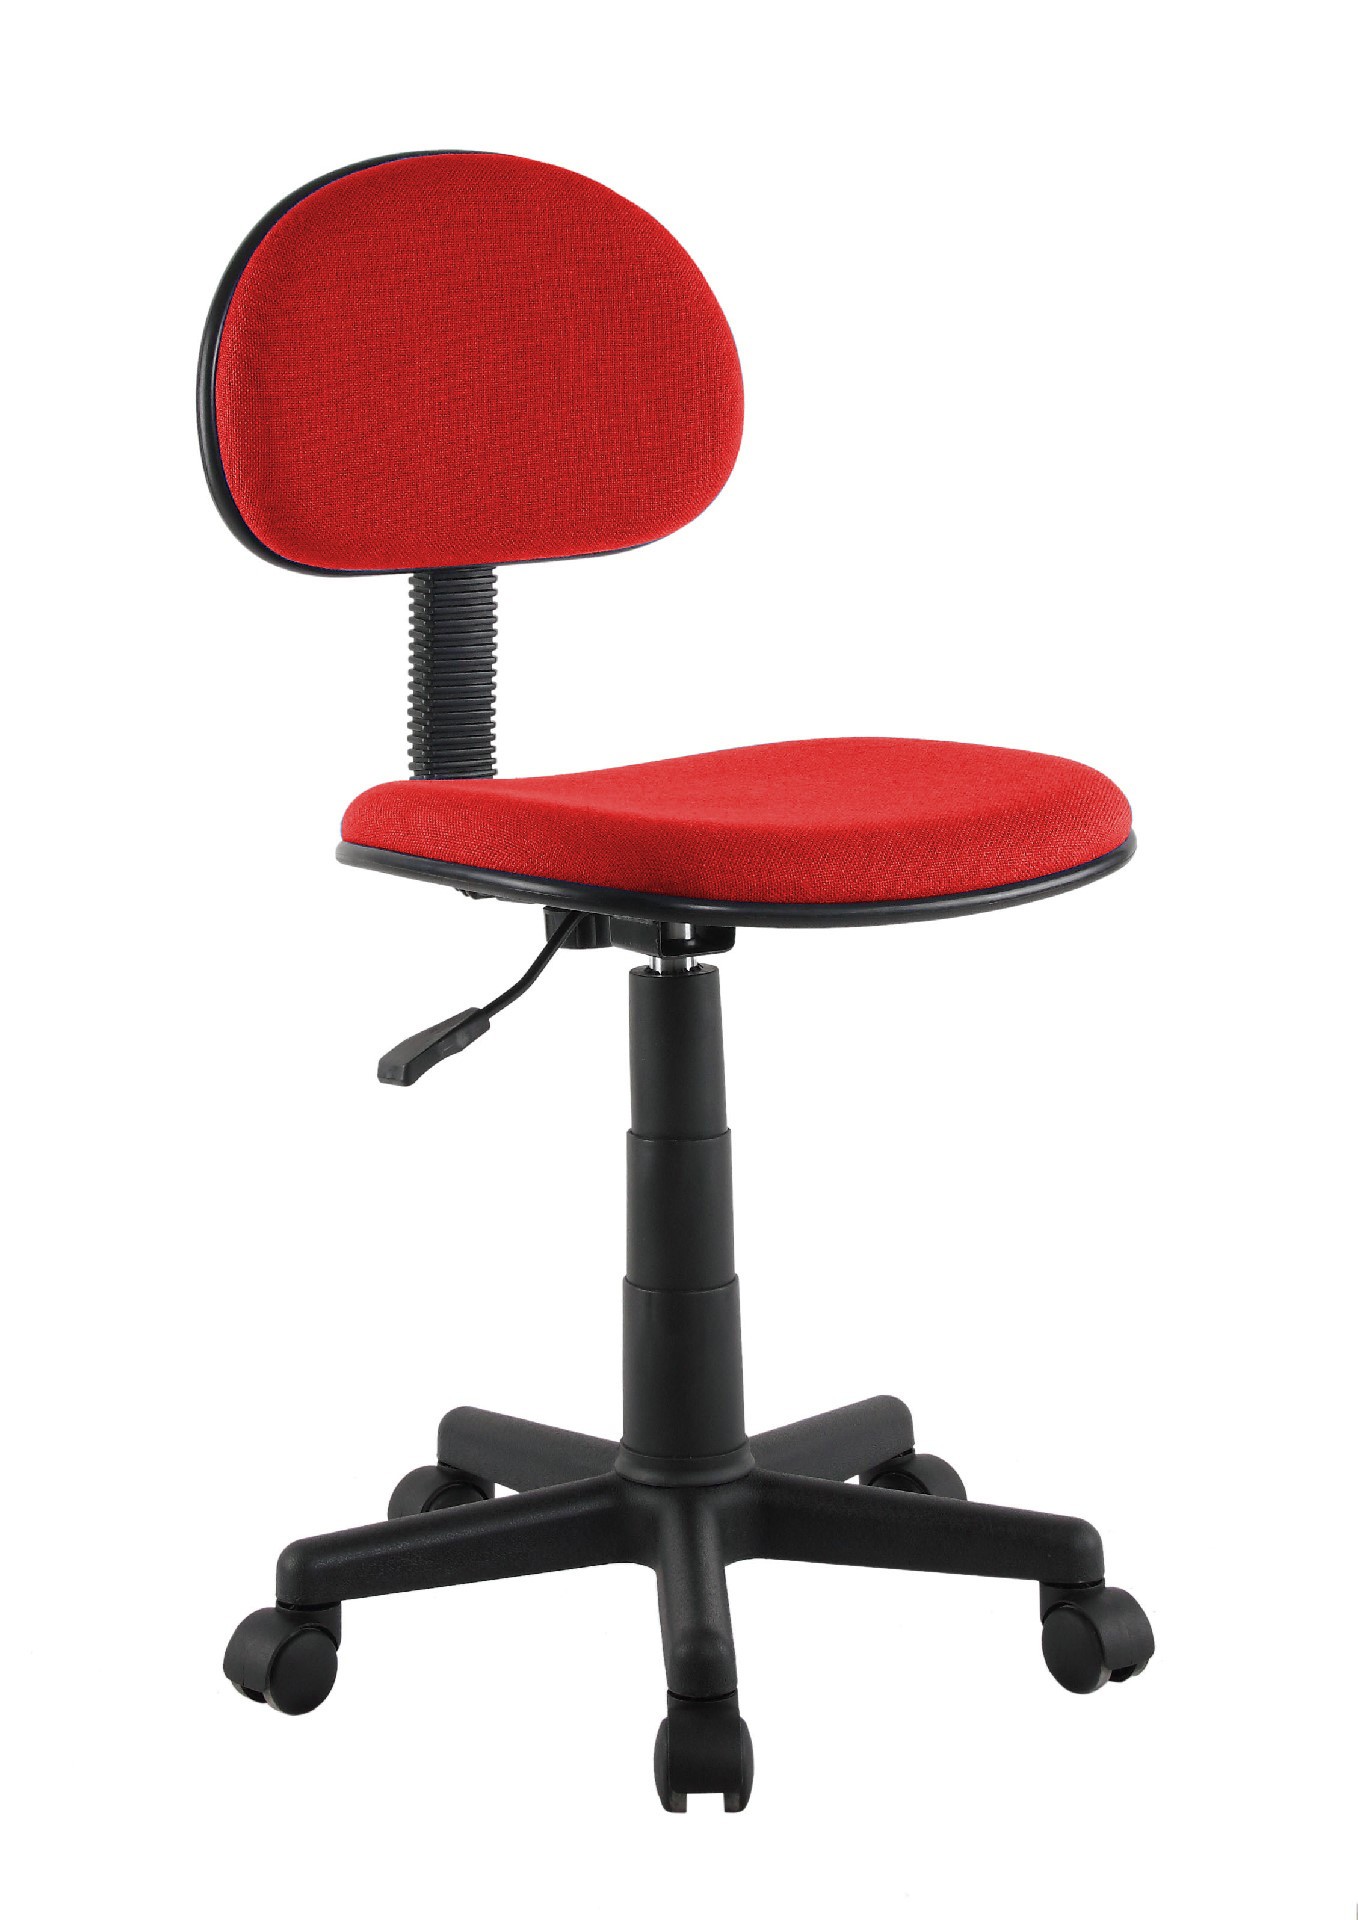 Red Office Chair - Office Chairs - Office Furniture - Office